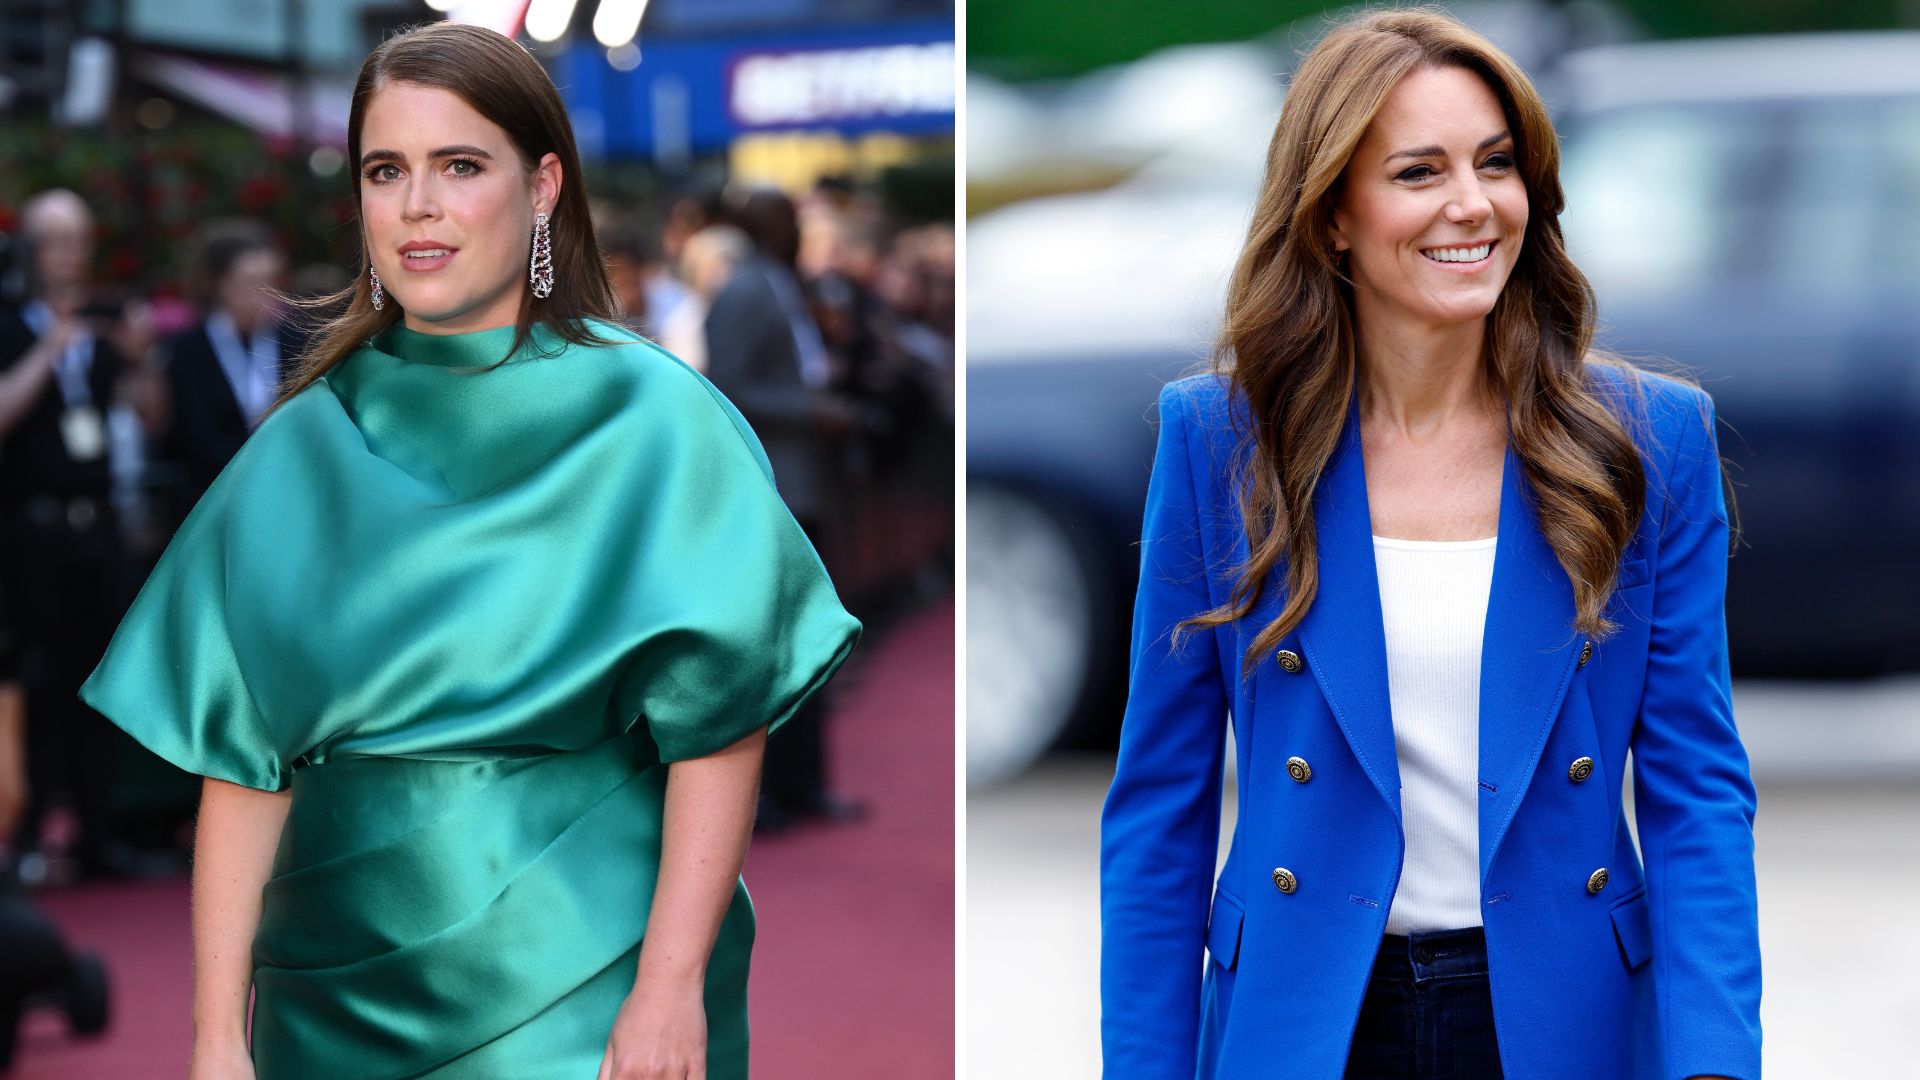 Trainer brand Princess Eugenie loves that Kate doesn't wear